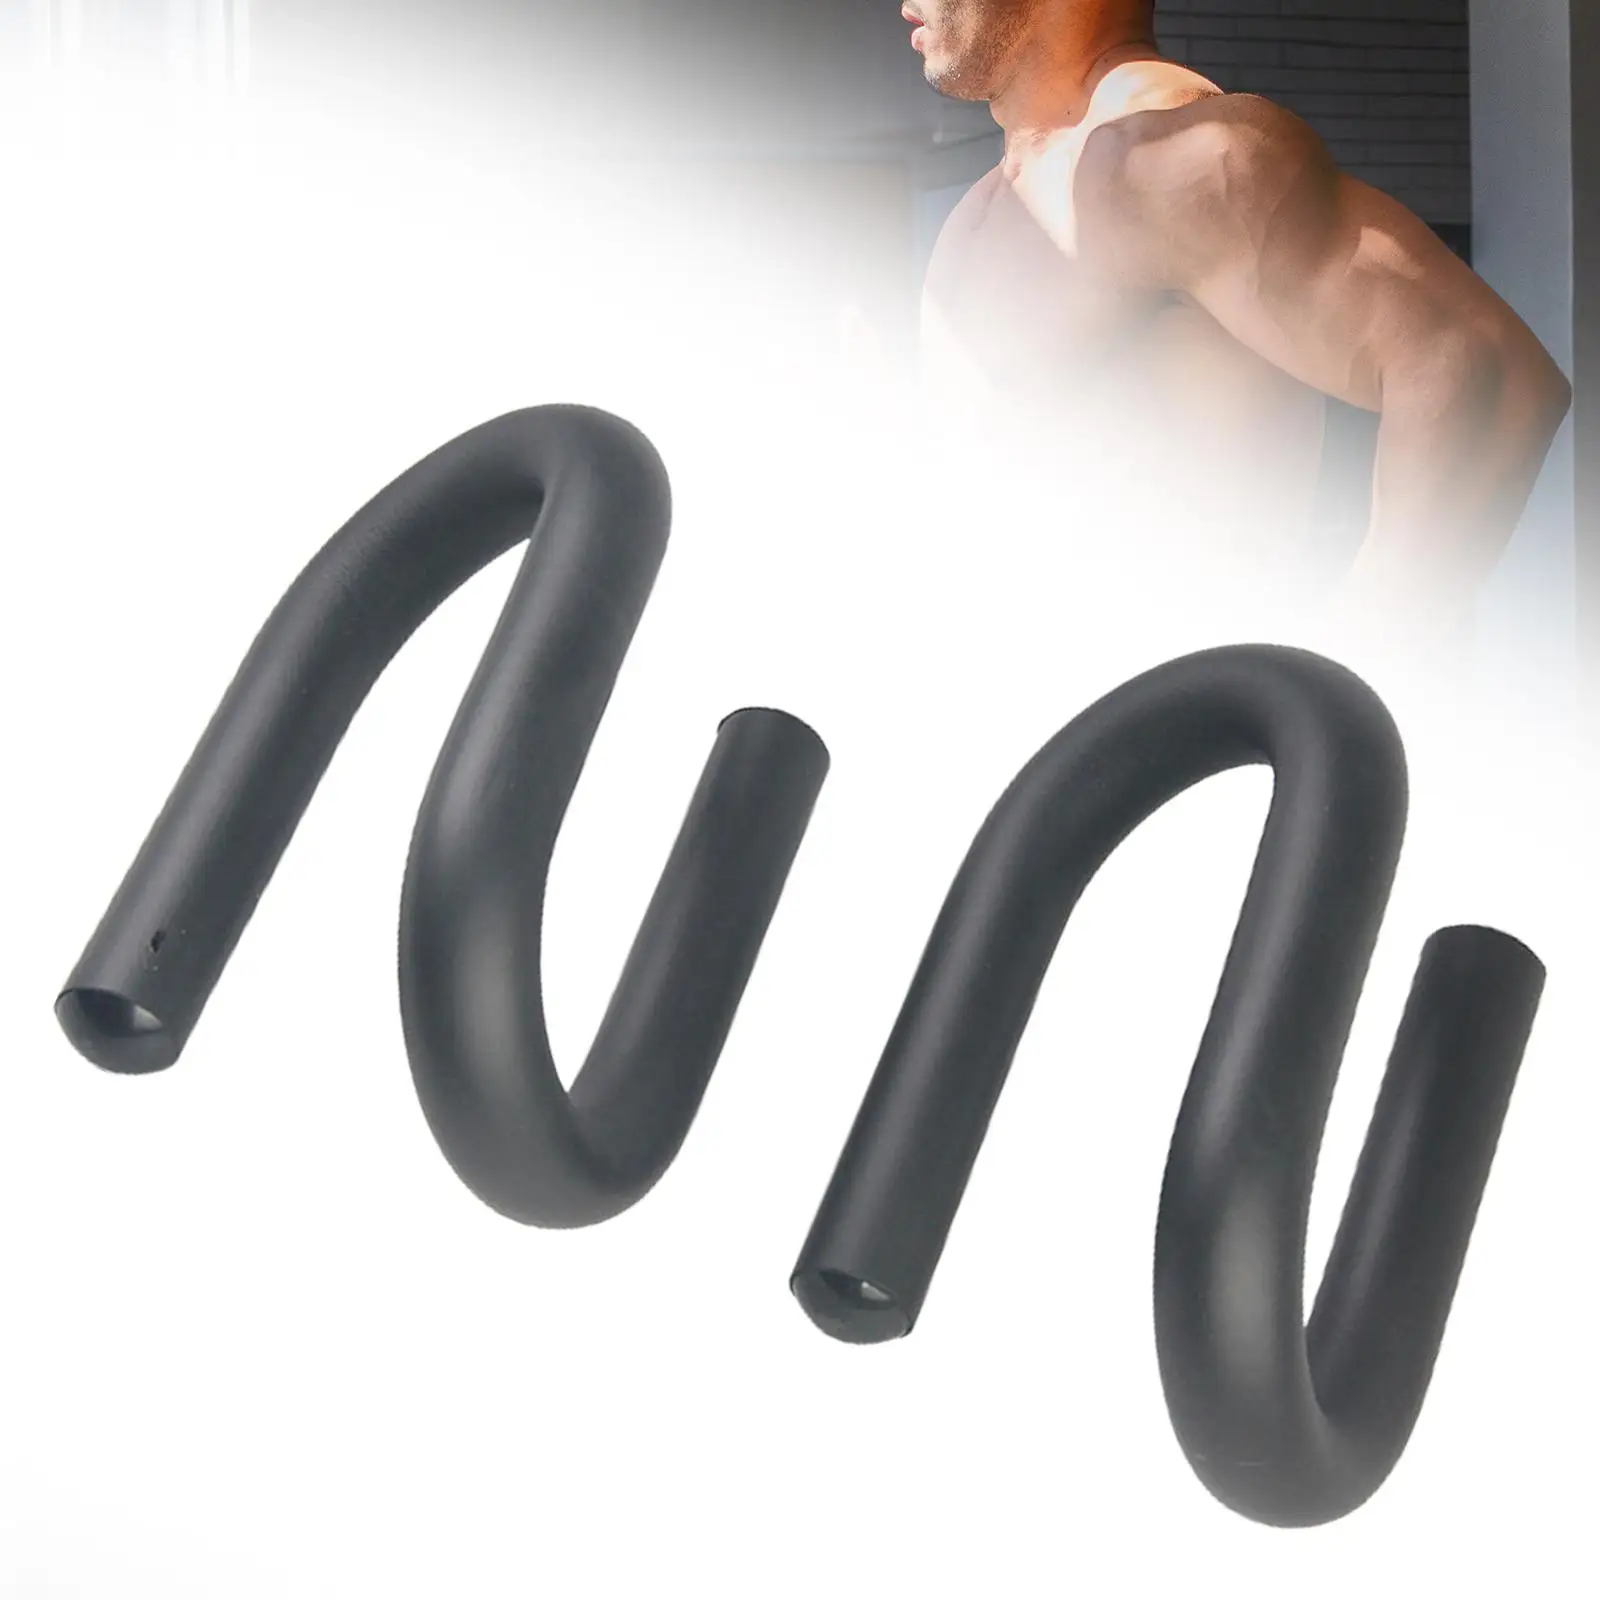 Push up Bars Portable Metal Durable Pushups Stand Push up Handles for Men Women Gym Adults Muscle Training Body Building